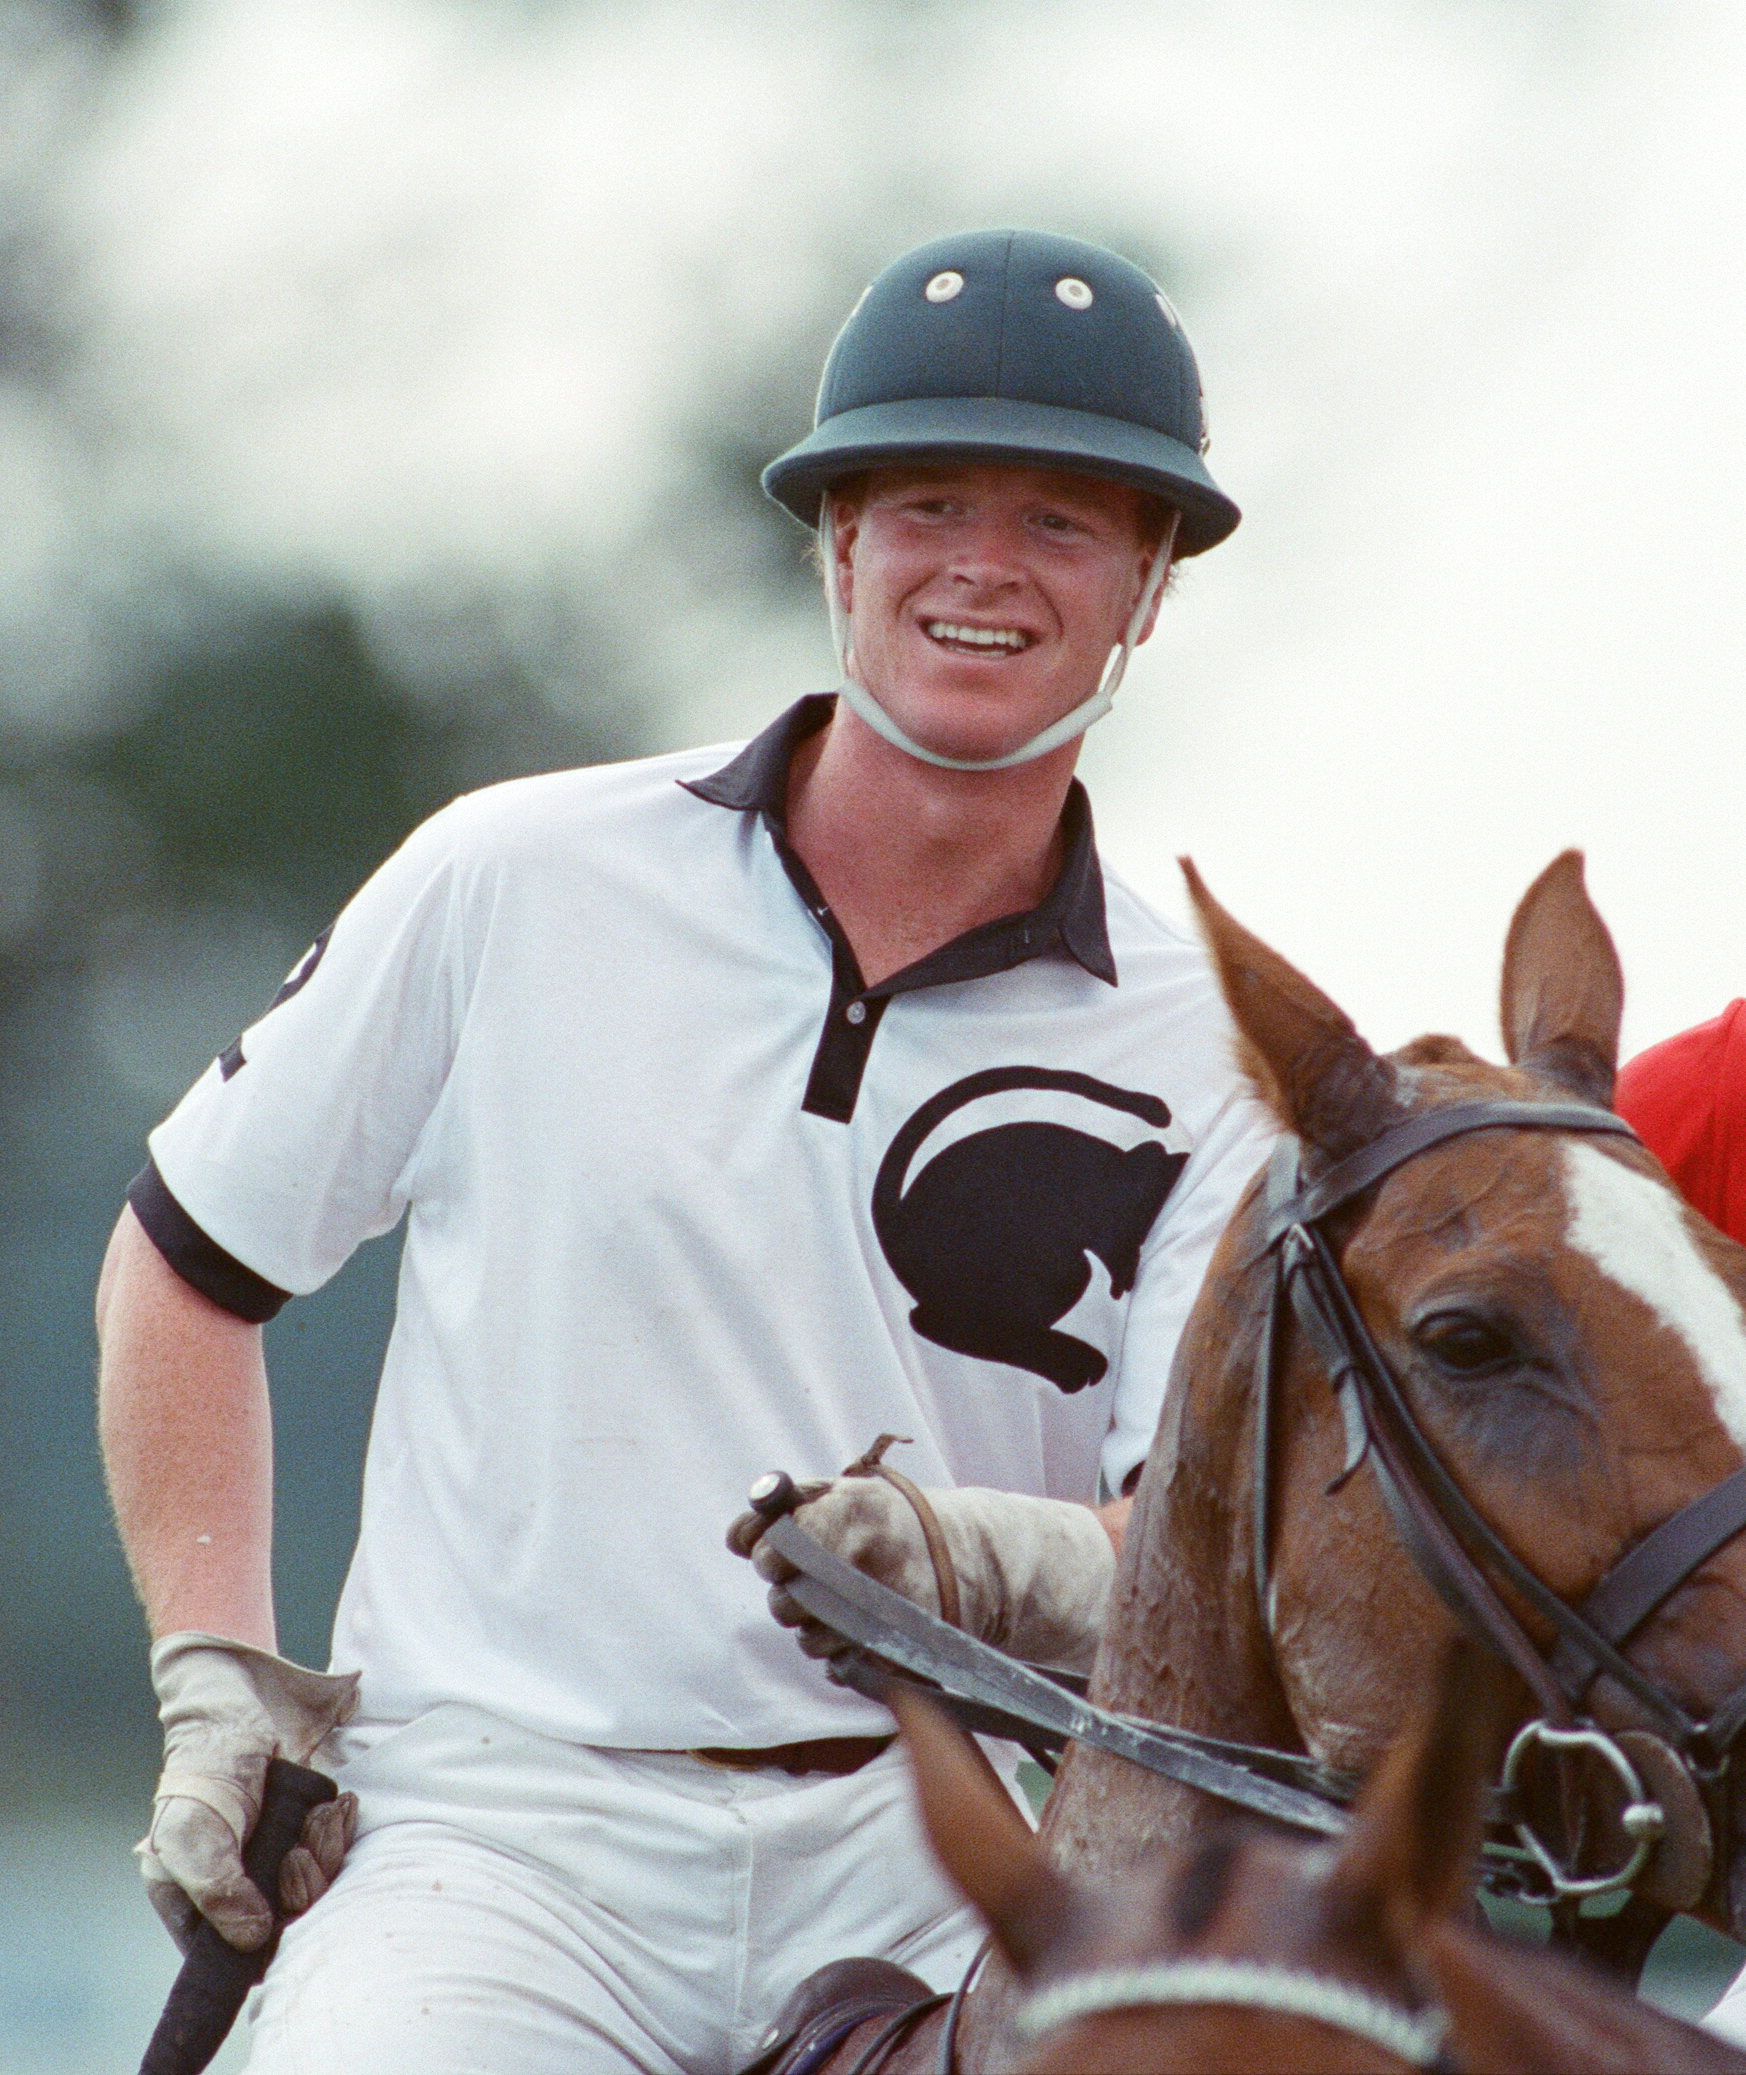 Major James Hewitt on the polo field, on July 16, 1991. | Source: Getty Images